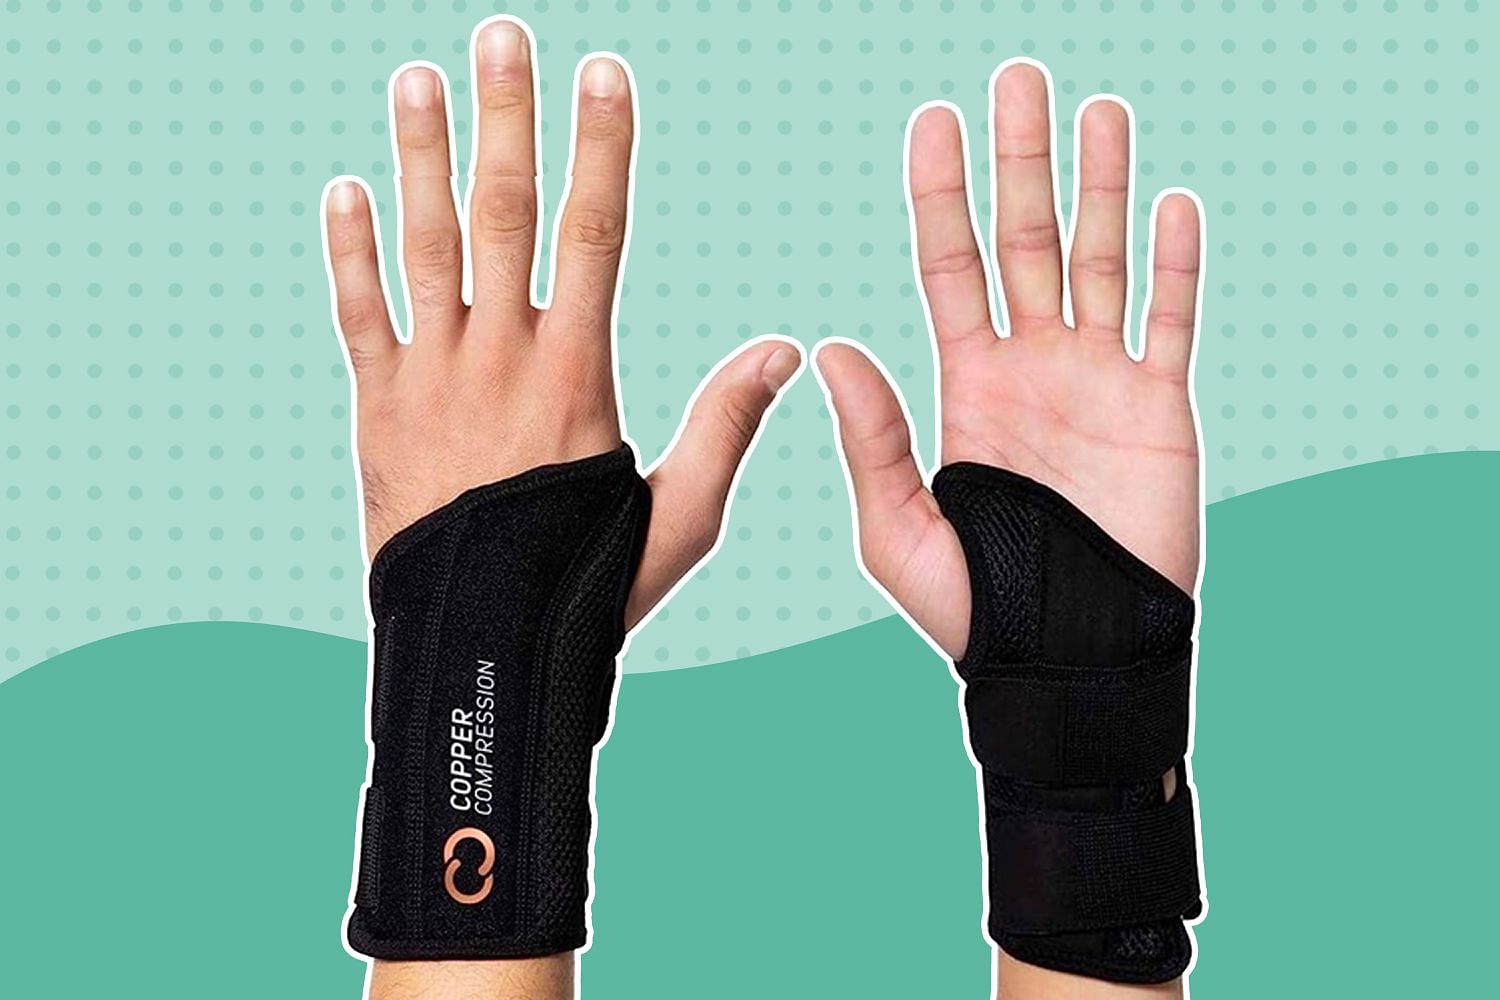 Wrist wraps aiding in maintaining a neutral wrist position